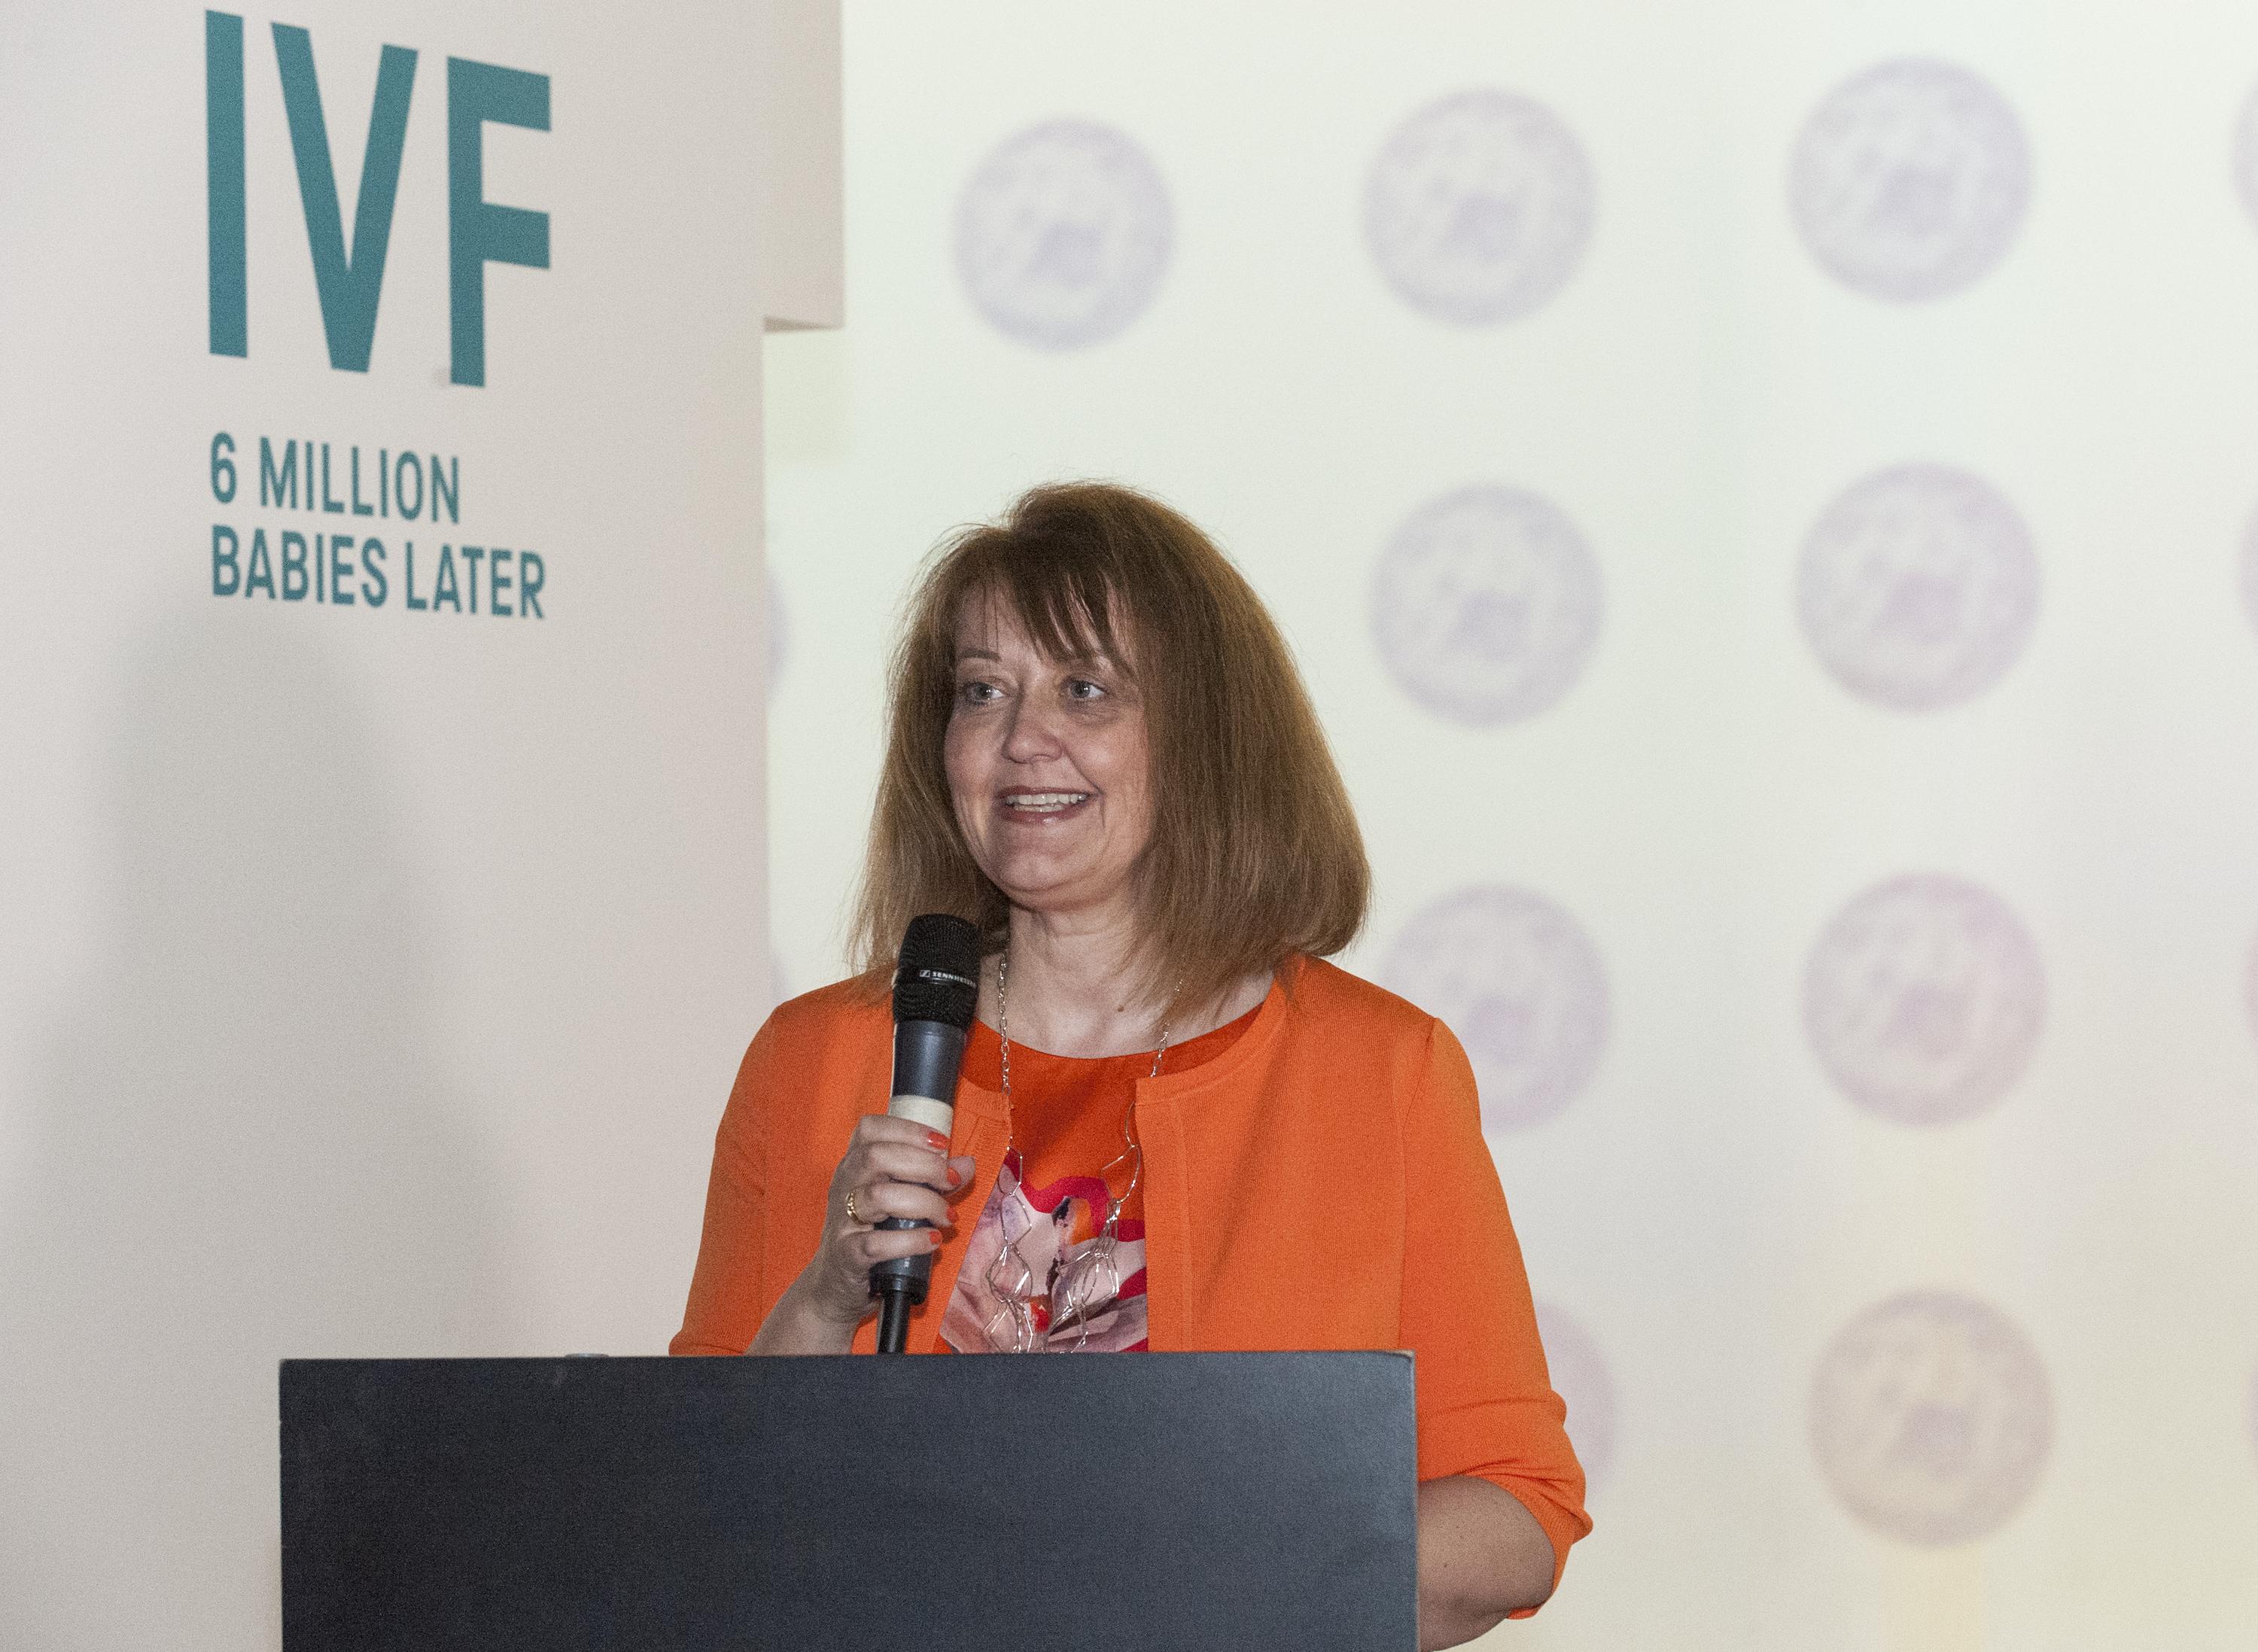 Sally Cheshire, chair of the Human Fertilisation and Embryology Authority. Speaking at the press launch of IVF: 6 Million Babies Later. An exhibition marking the 40th anniversary of the 'miraculous' birth of Louise Brown on 25 July 1978. The exhibition explores the ten years of testing, hundreds of failed attempts and many setbacks faced by Robert Edwards, Patrick Steptoe and Jean Purdy, in their quest to treat infertility and achieve the first successful IVF birth.